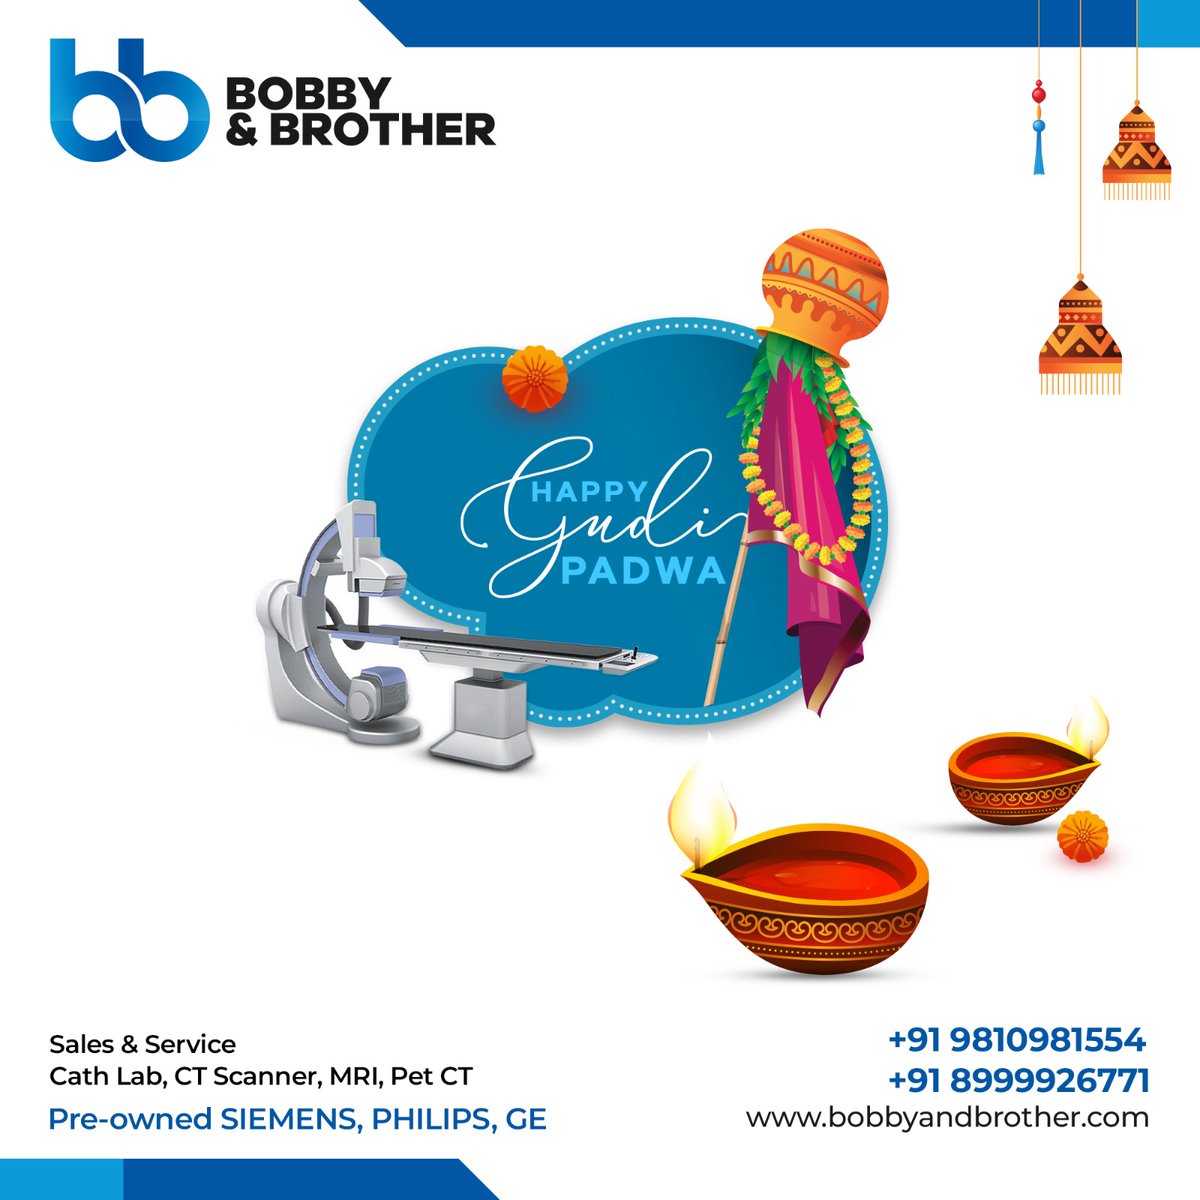 Bobby & Brother wishes you a prosperous new year! May this year be the dawn of happiness, good health, and peace in your life. Happy Gudi Padwa!

Follow us : @bobbyandbrother

#MaharashtrianNewYear #GudiPadwa #GudiPadwa2024 #UgadiGudiPadwa #FestiveSeason #NewBeginnings